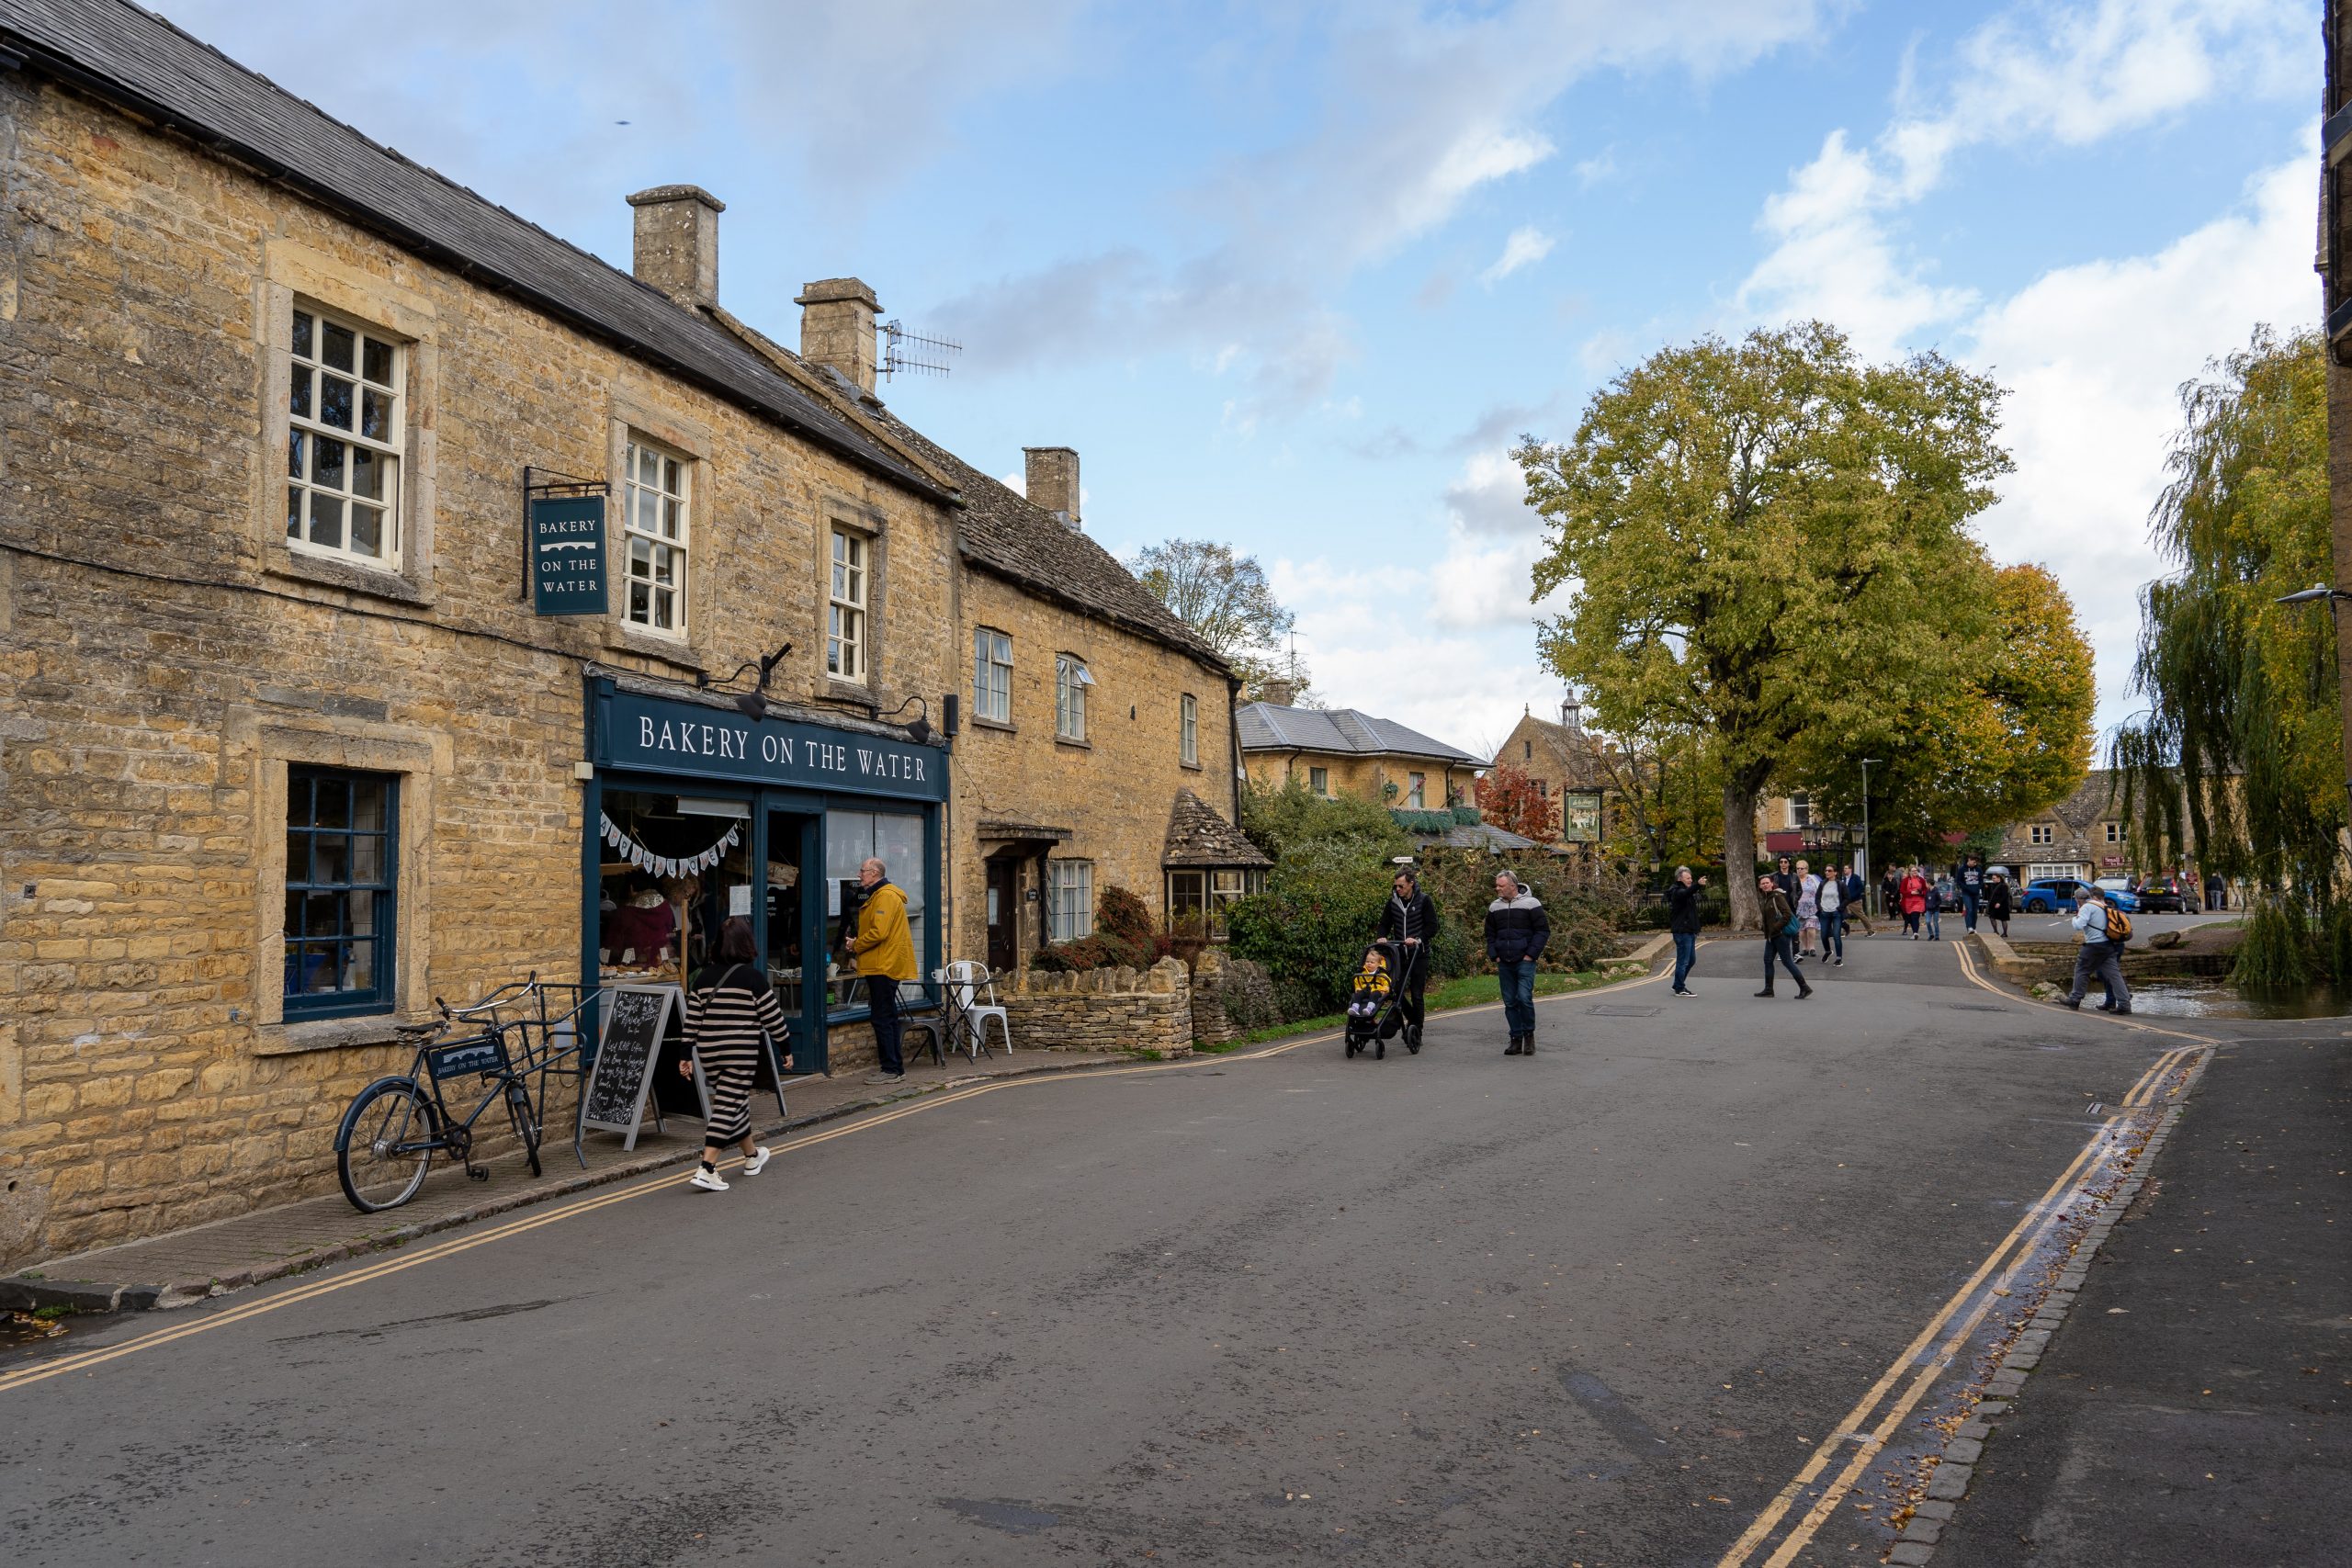 Bourton-on-the-Water with the local beautiful bakery